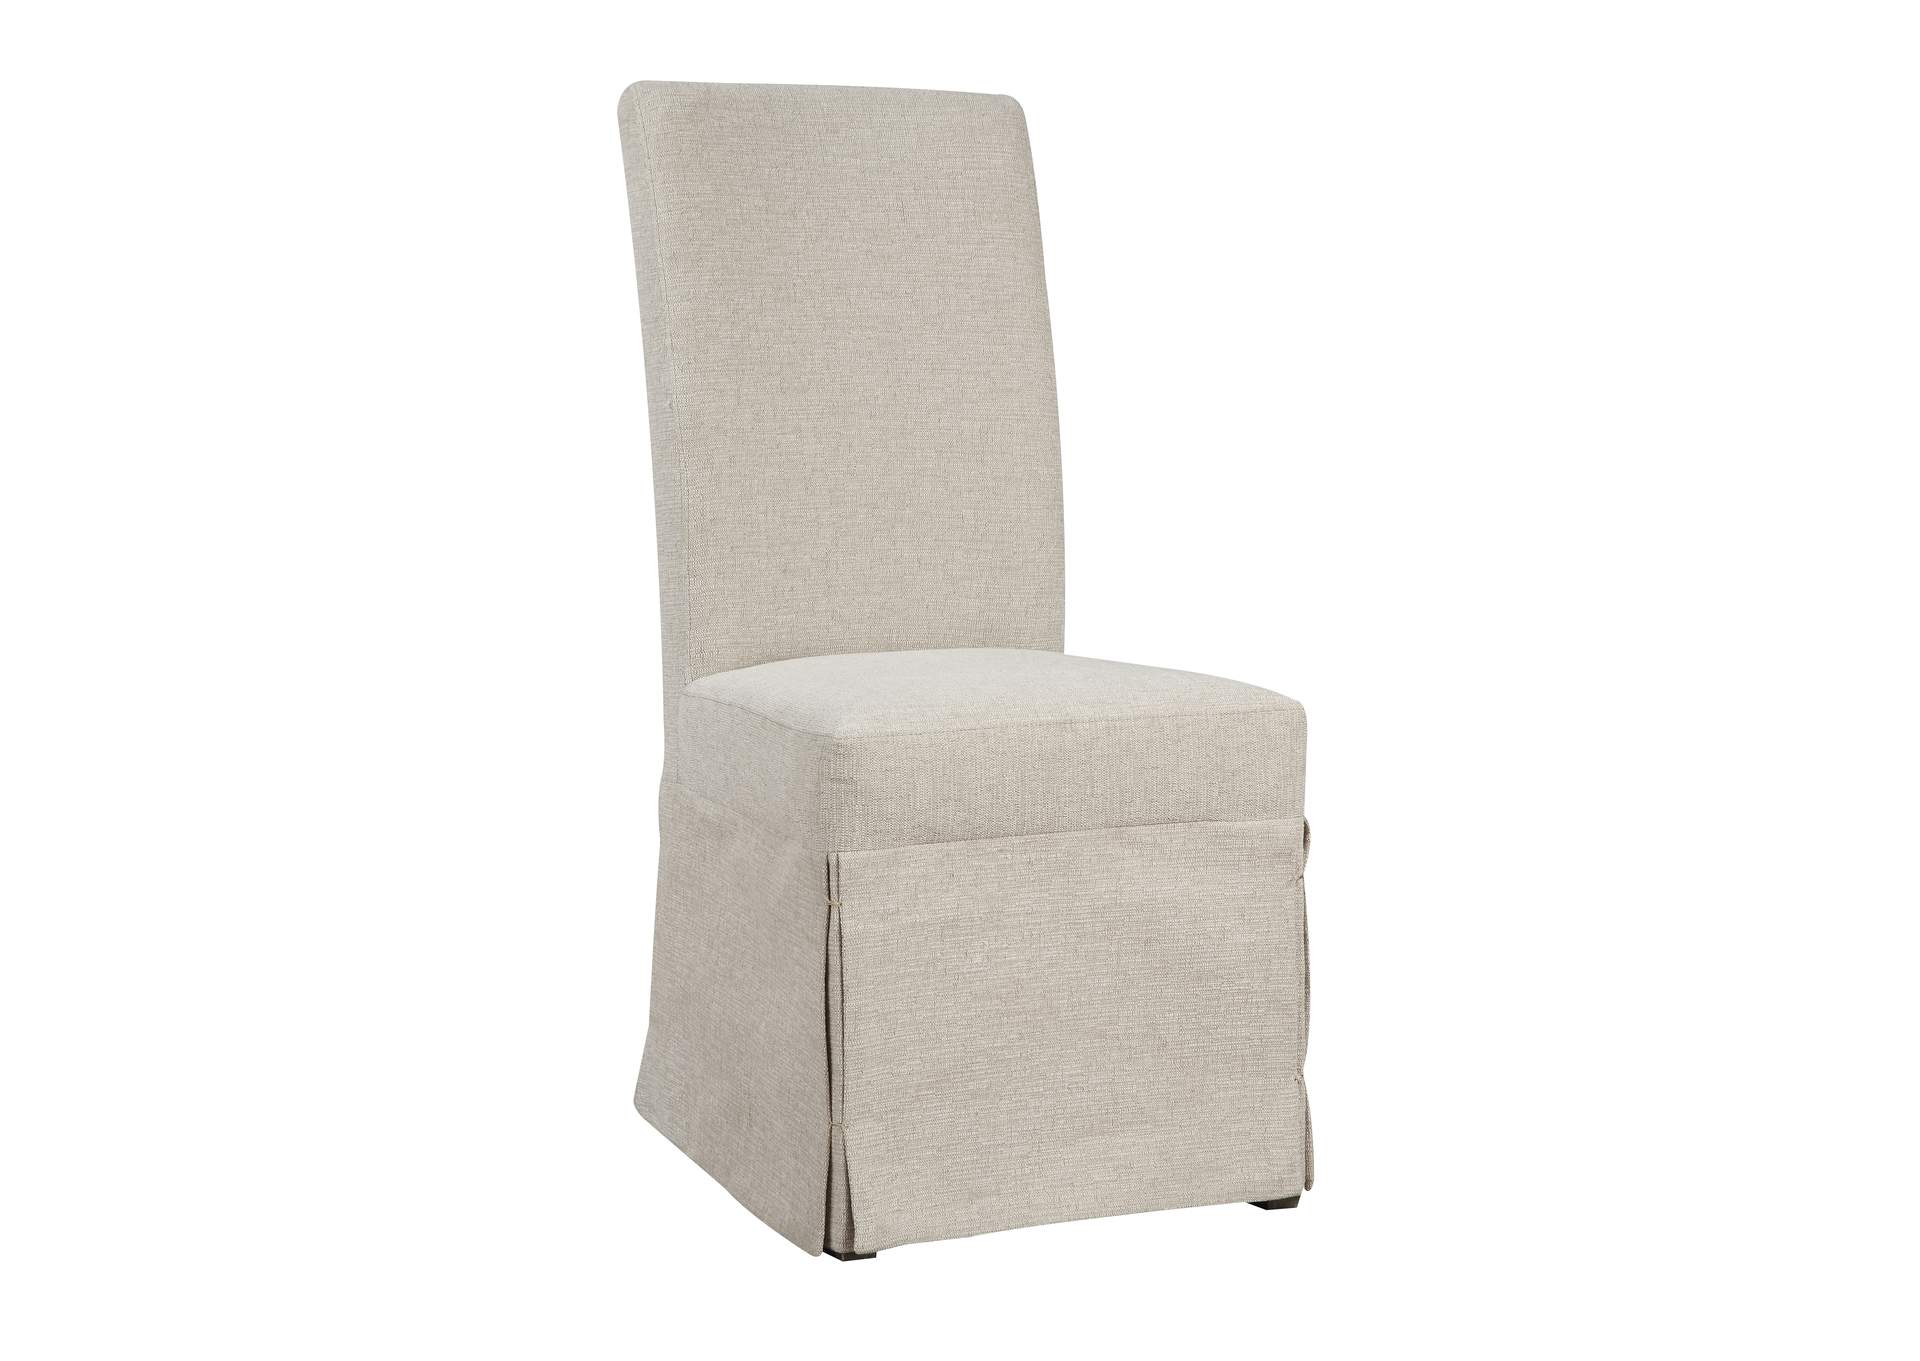 Paladin Upholstered Dining Chair,Emerald Home Furnishings